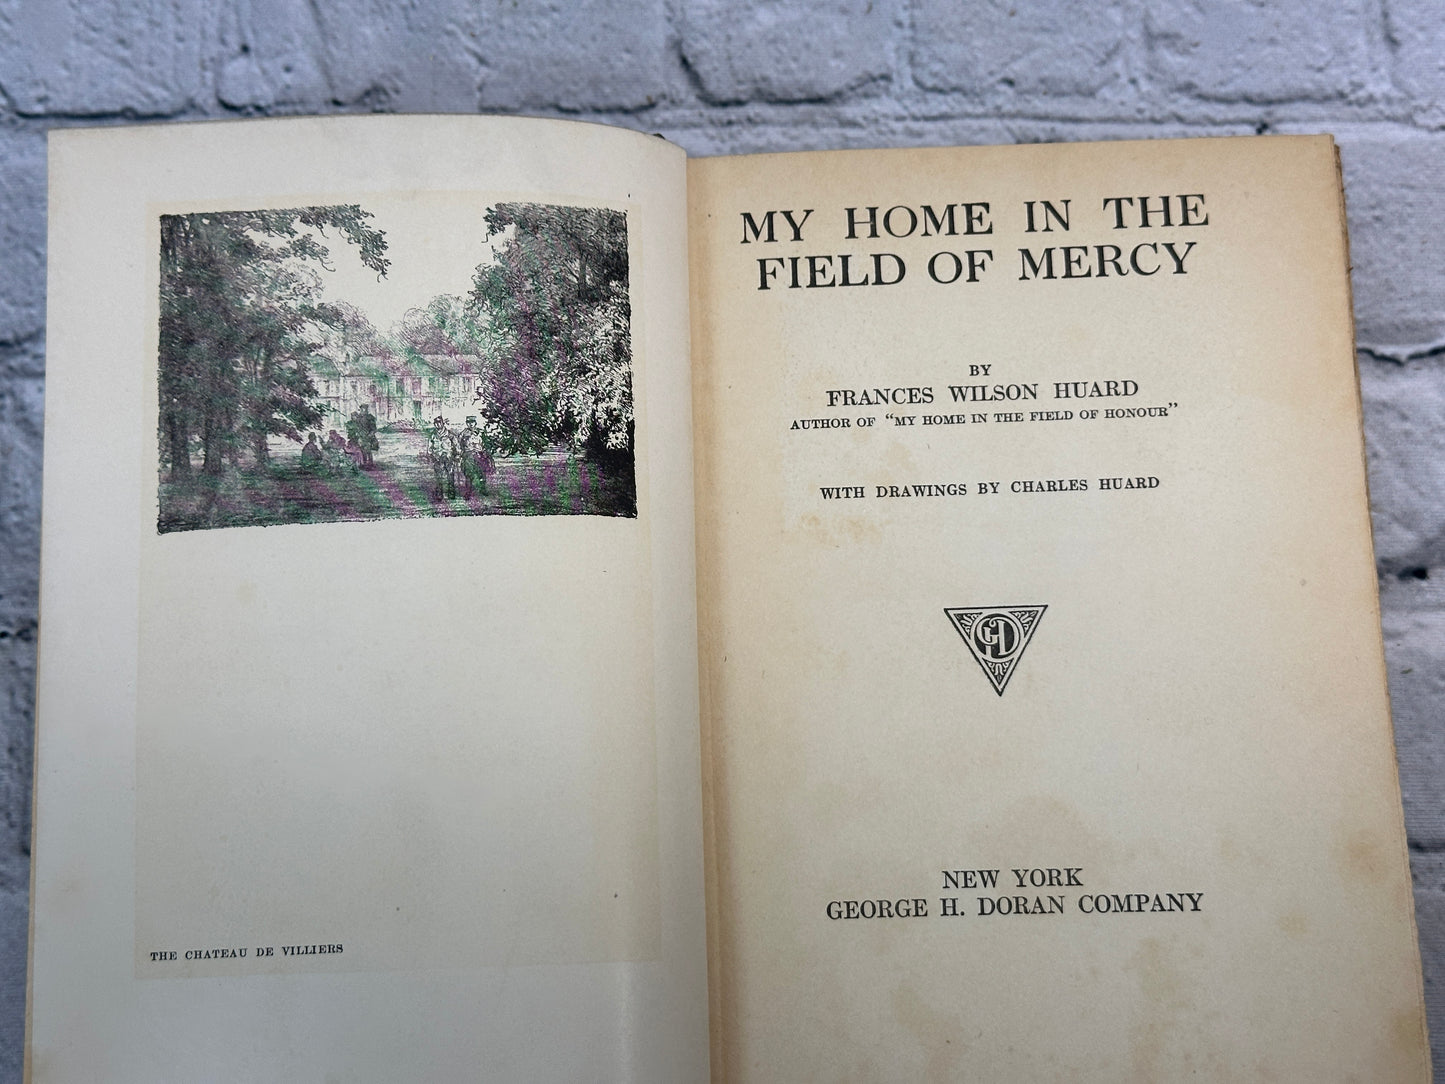 My Home in the Field of Mercy by Frances Wilson Huard [1917]